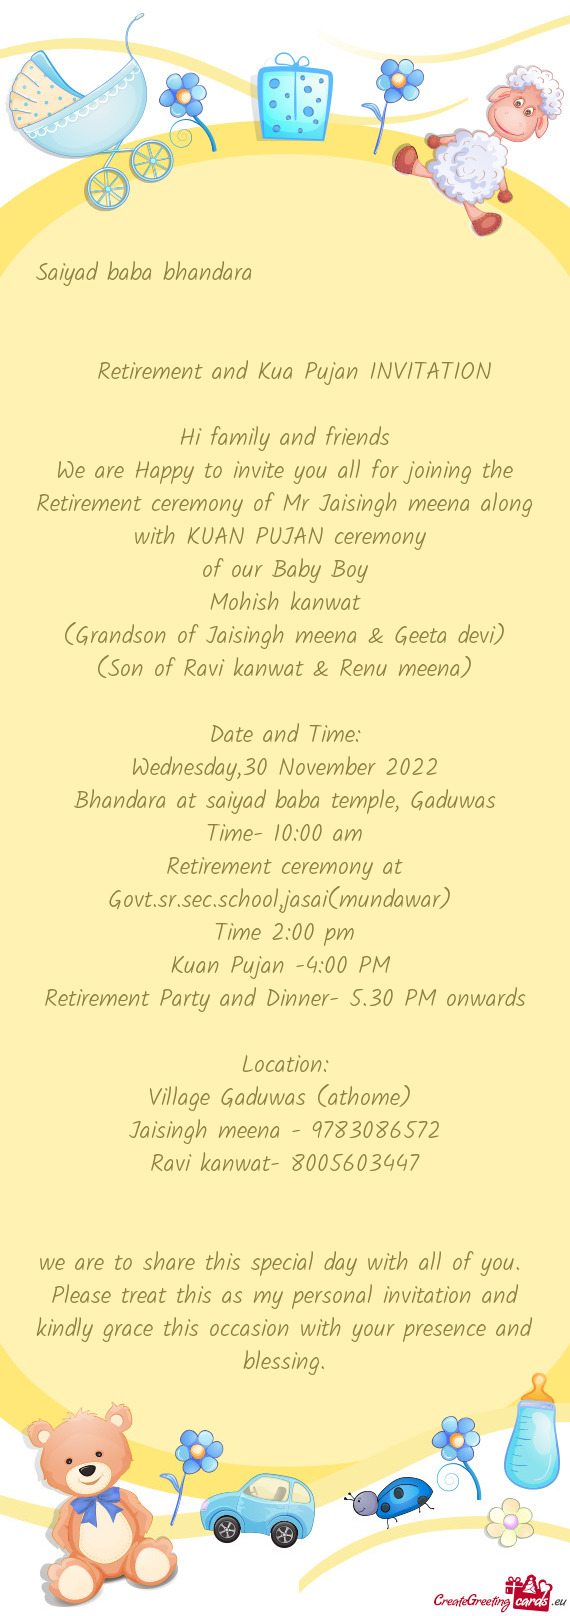 We are Happy to invite you all for joining the Retirement ceremony of Mr Jaisingh meena along with K